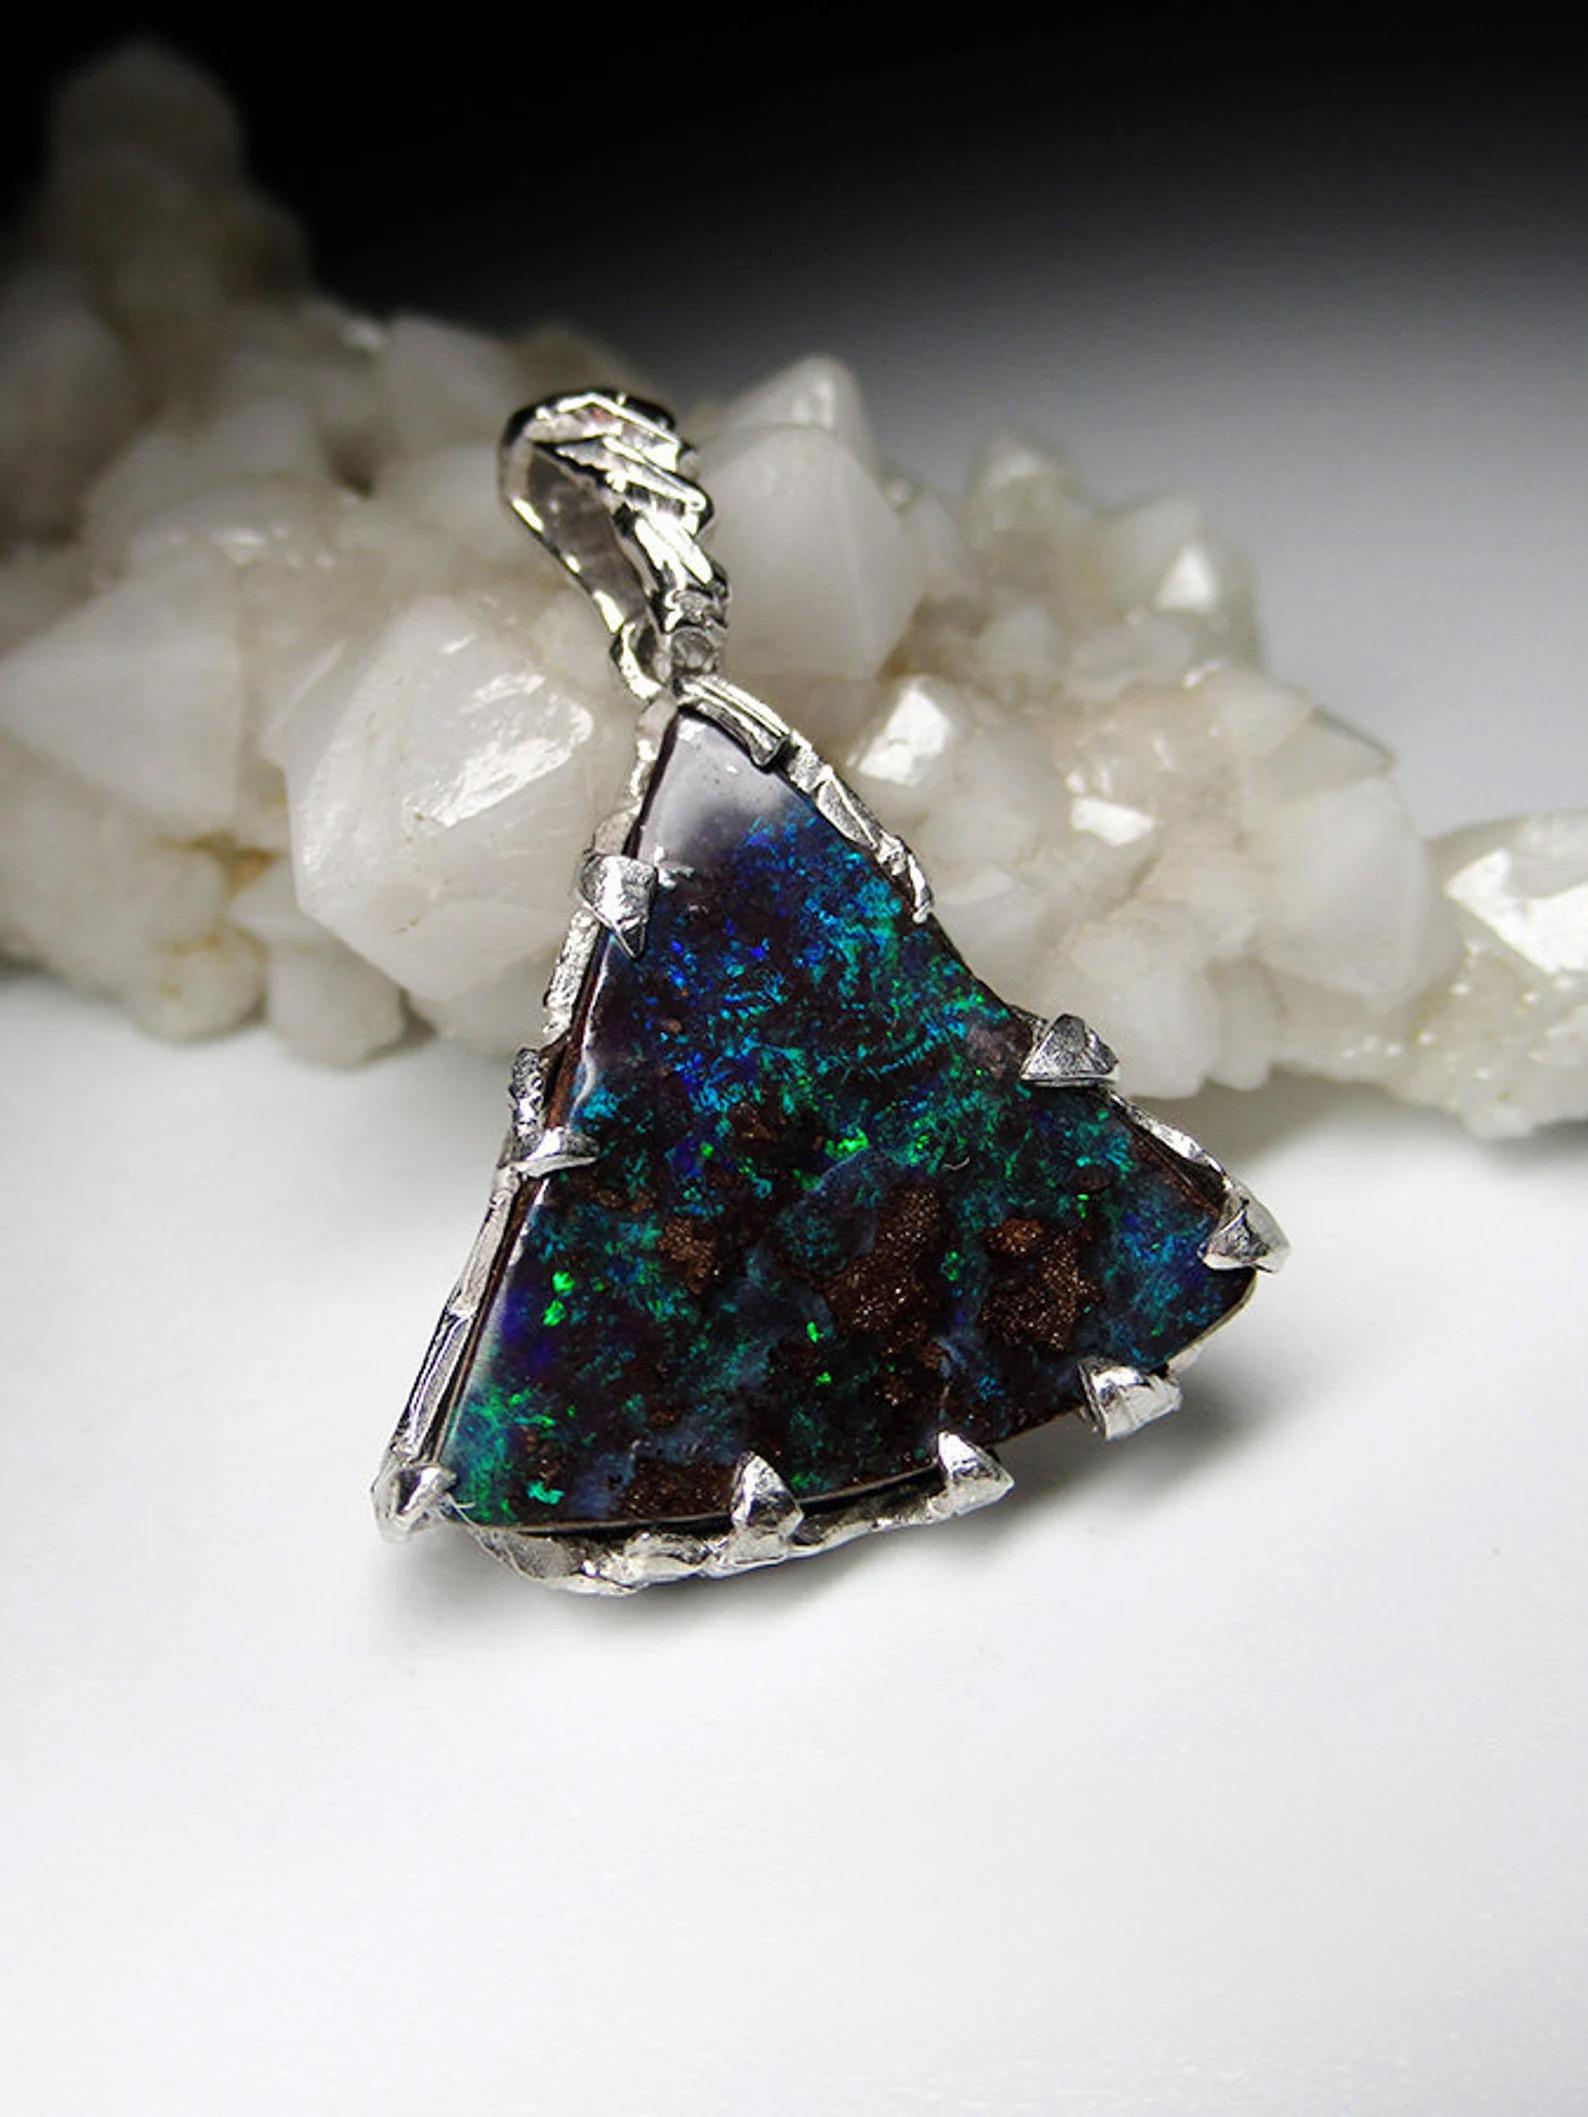 Silver pendant with natural Boulder Opal 
opal origin - Australia
opal measurements - 0.16 x 0.75 x 0.75 in / 4 х 19 х 19 mm
opal weight - 8.90 carat
pendant length - 30 mm / 1.2 in
pendant weight - 3.79 grams


We ship our jewelry worldwide – for